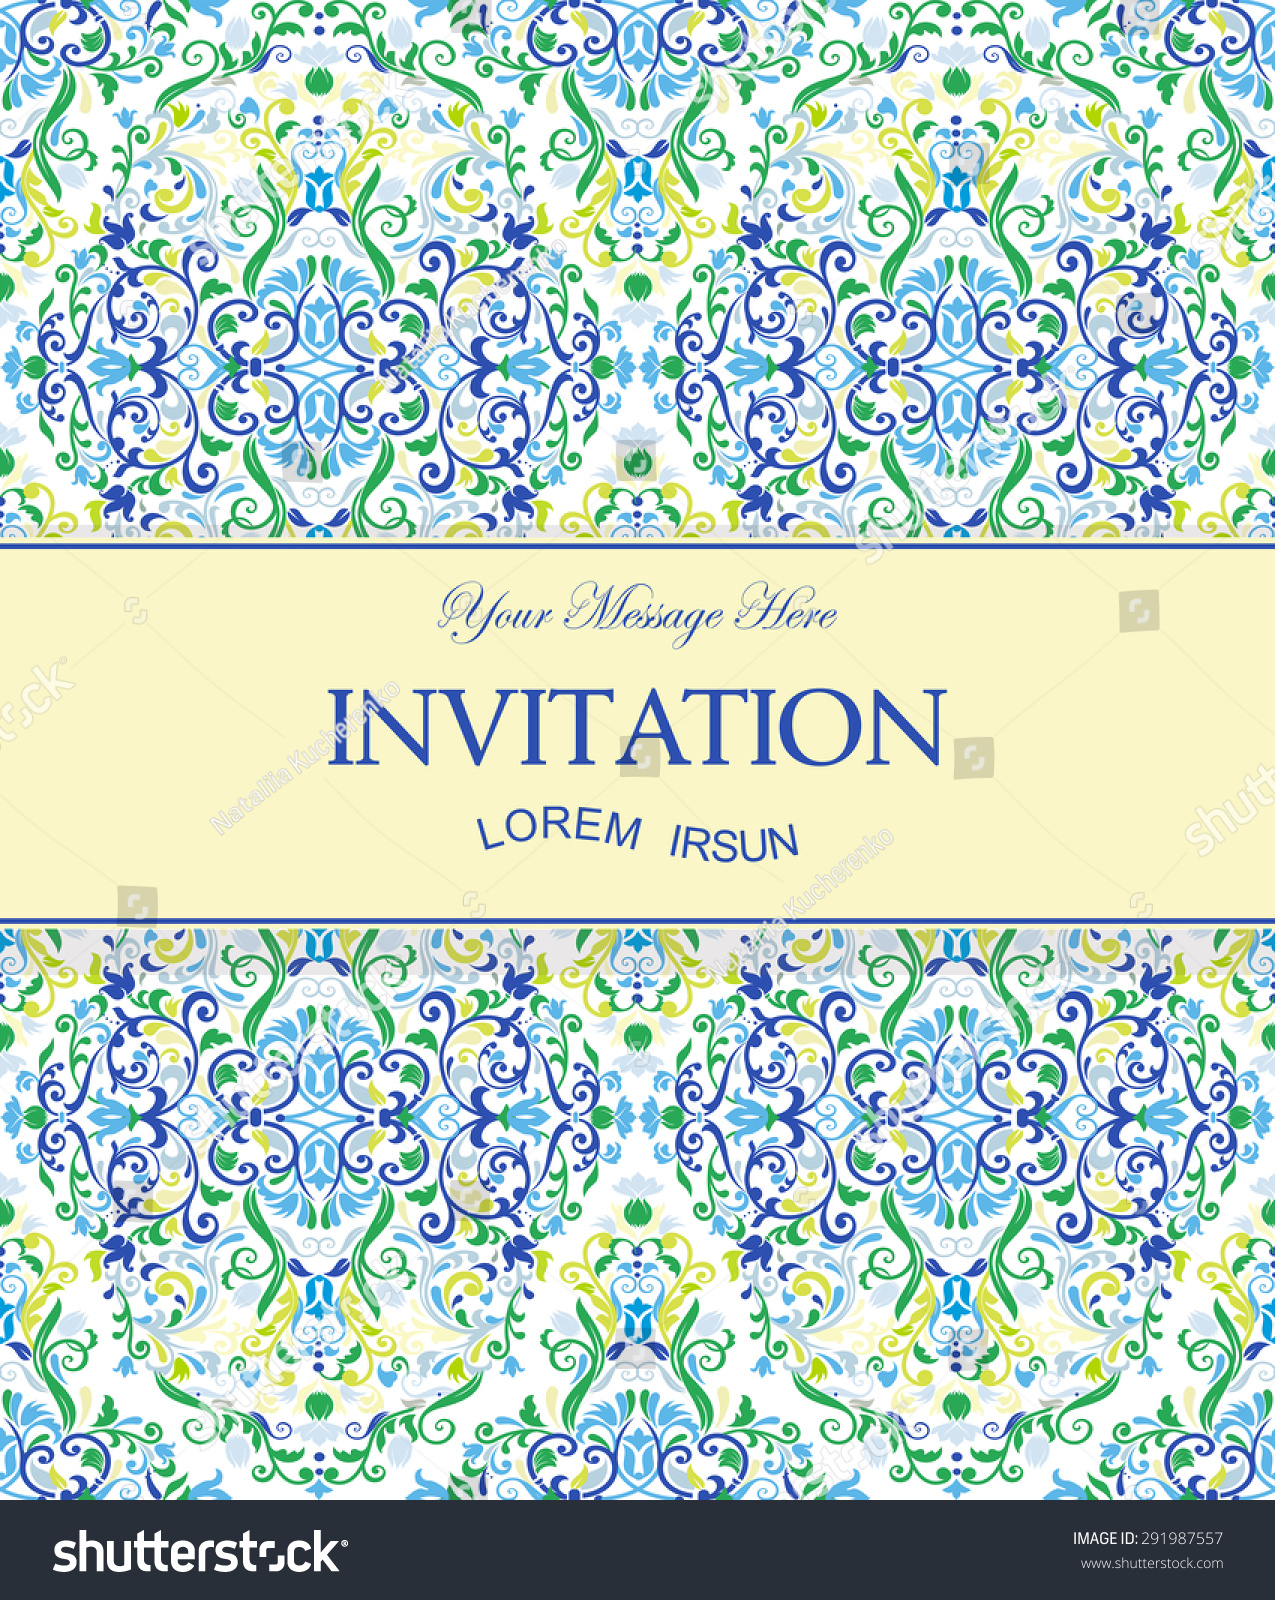 Invitation On A Seamless Colorful Floral Pattern Background Stock